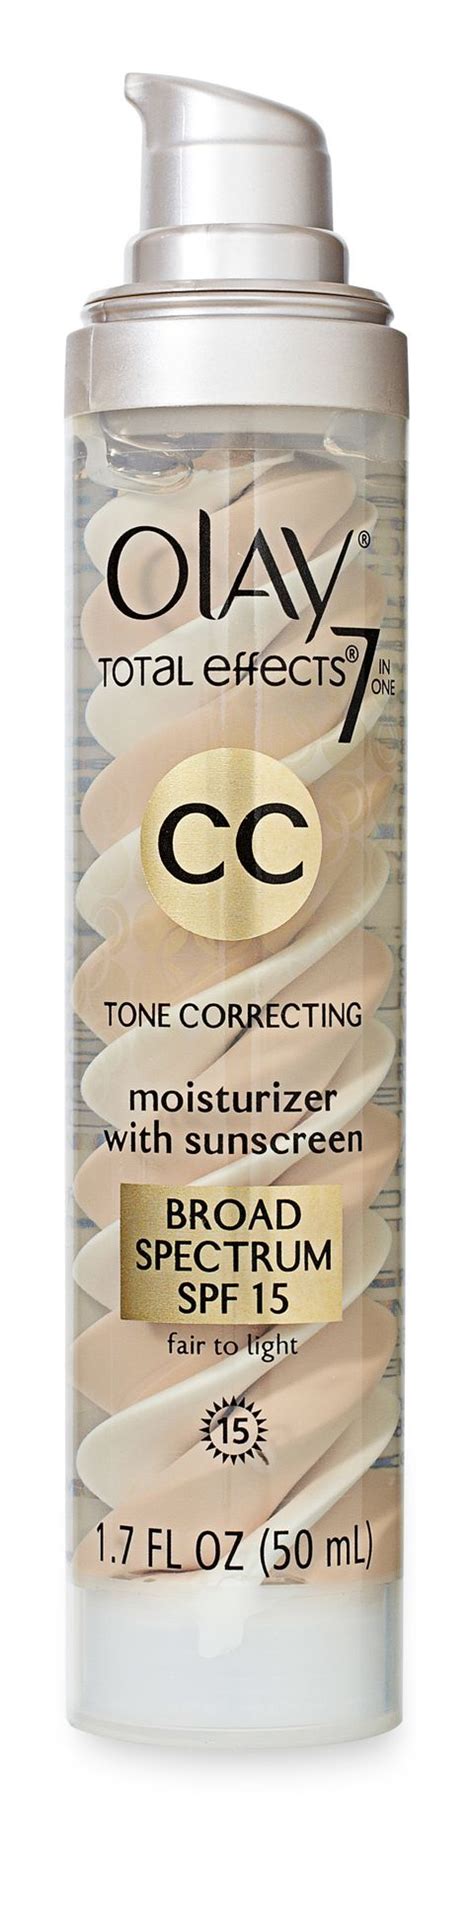 Olay Cc Cream Total Effects Tone Correcting Moisturizer Review